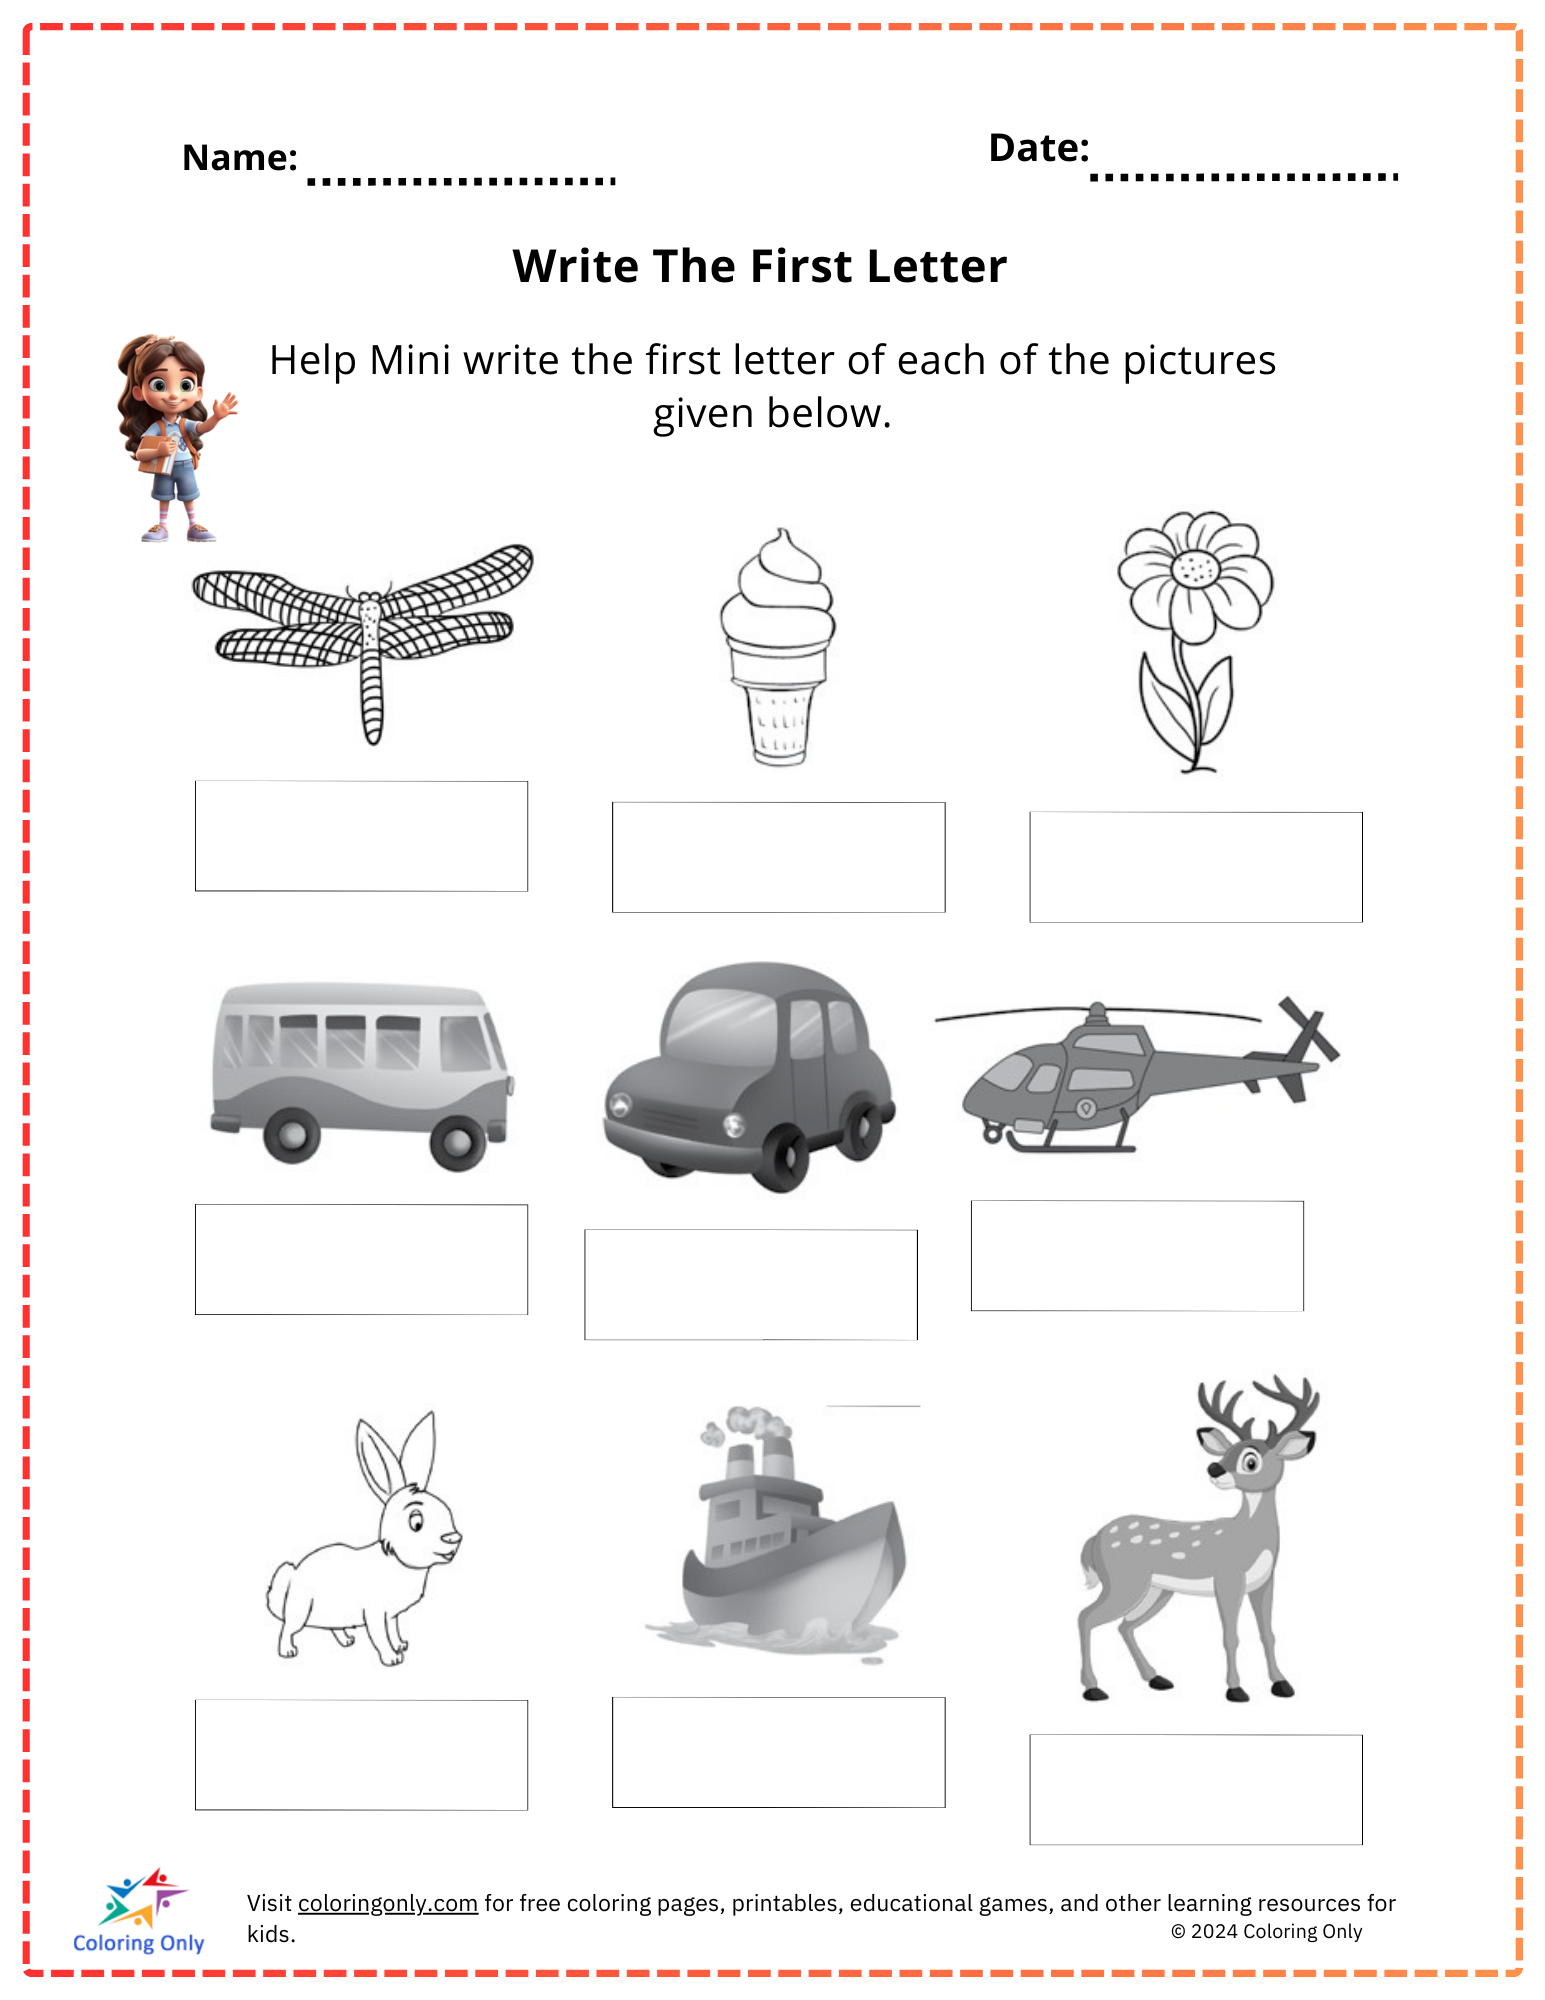 Write The First Letter Free Printable Worksheet